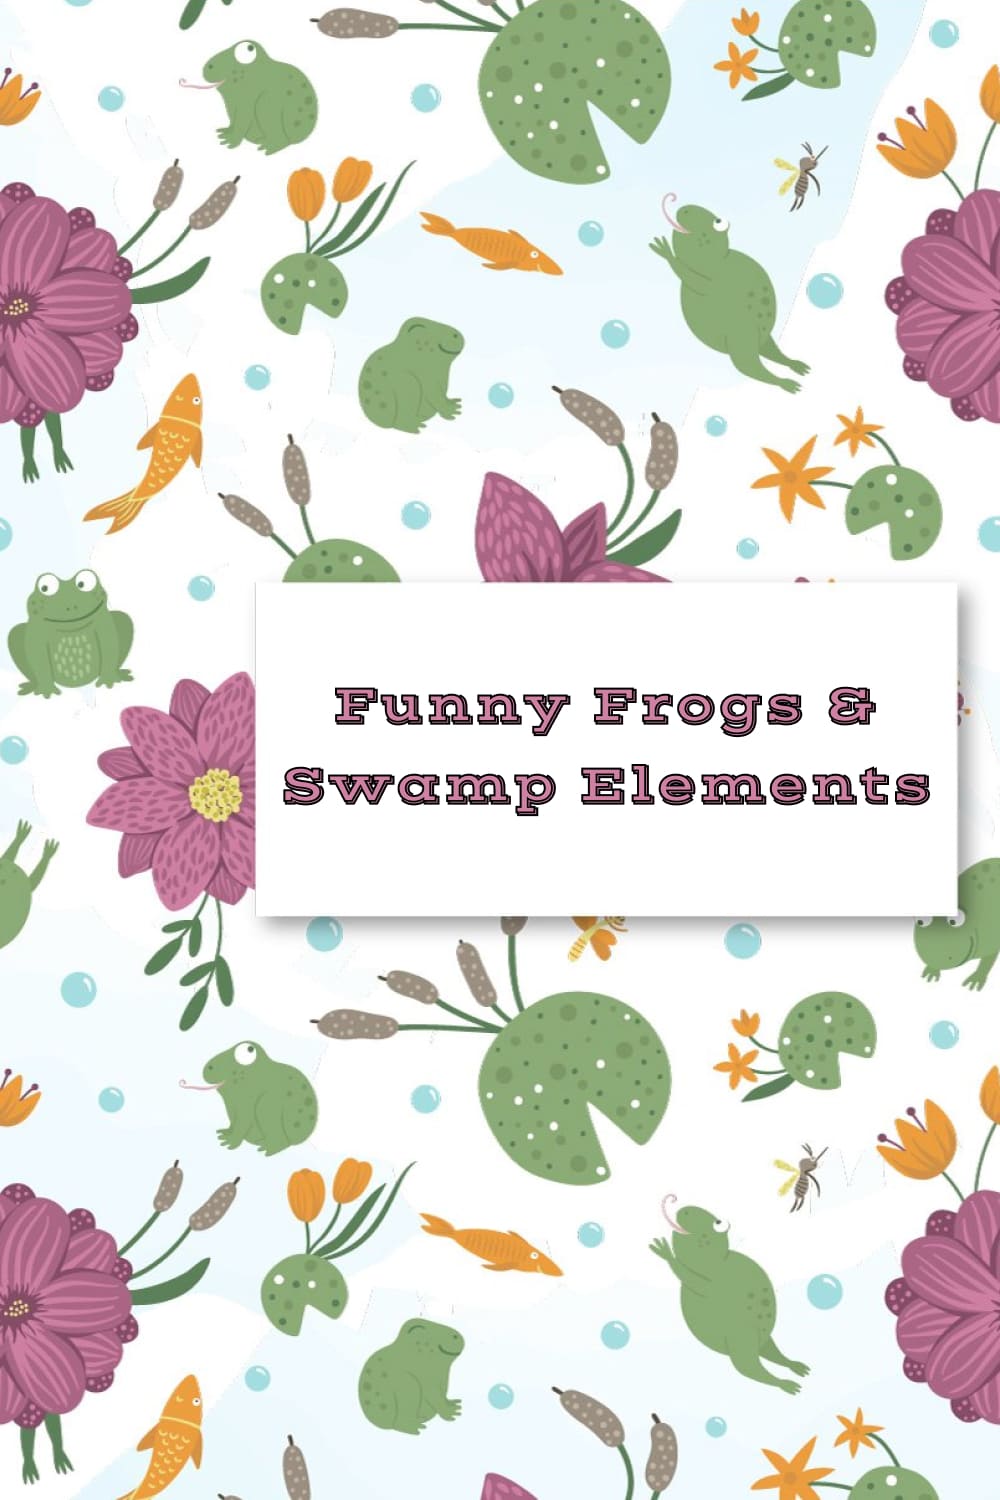 Funny Frogs and Swamp Elements - Pinterest Image Preview.